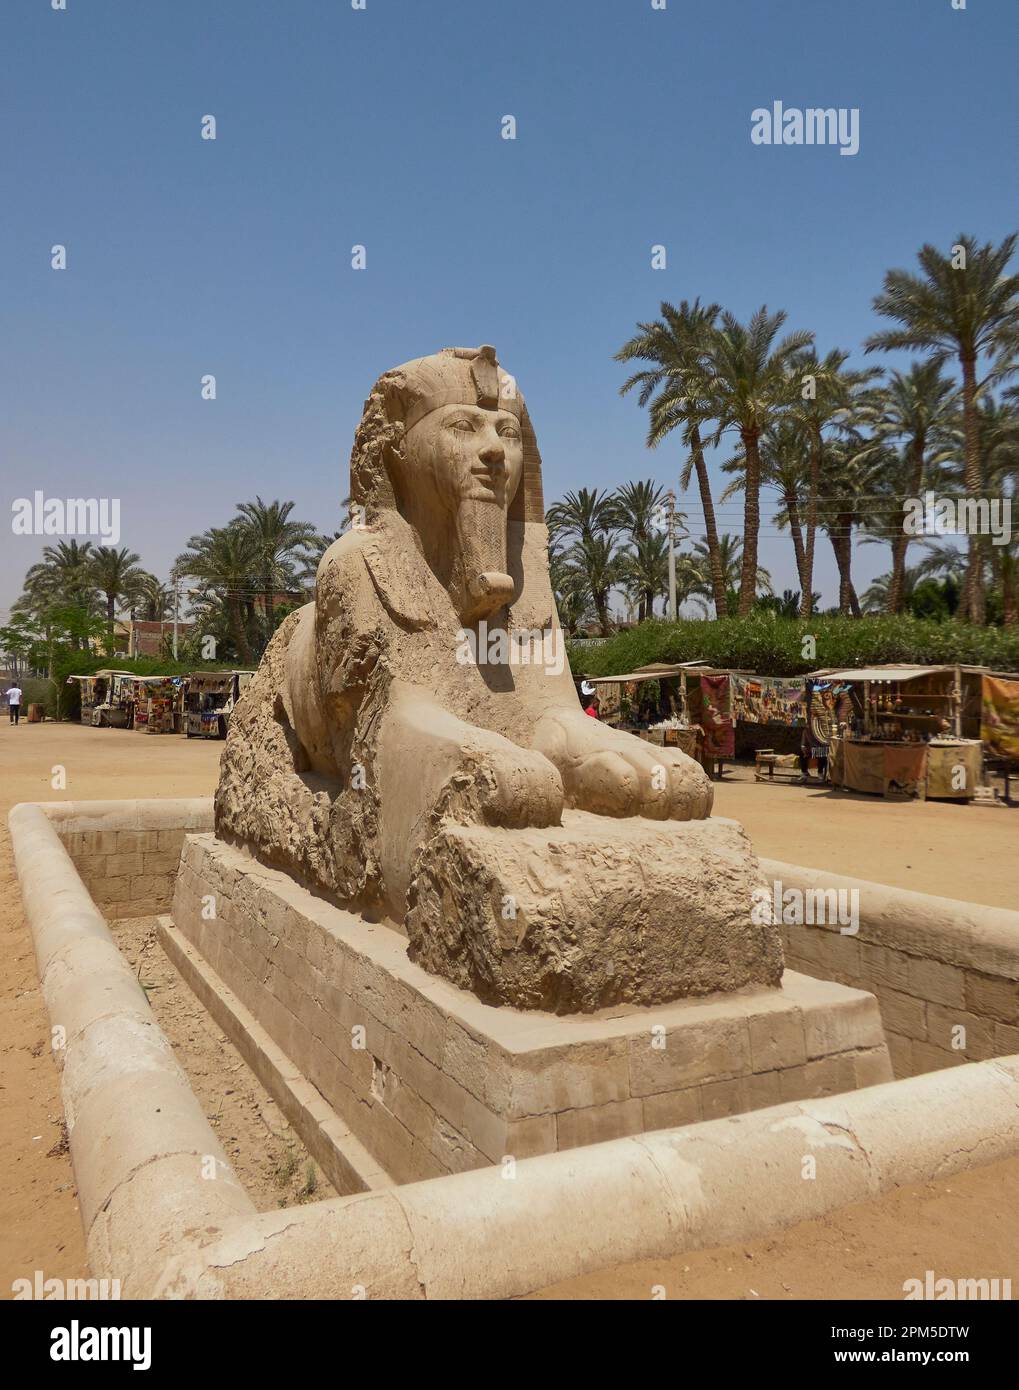 Alabaster sphinx in Egypt captured on a sunny day Stock Photo